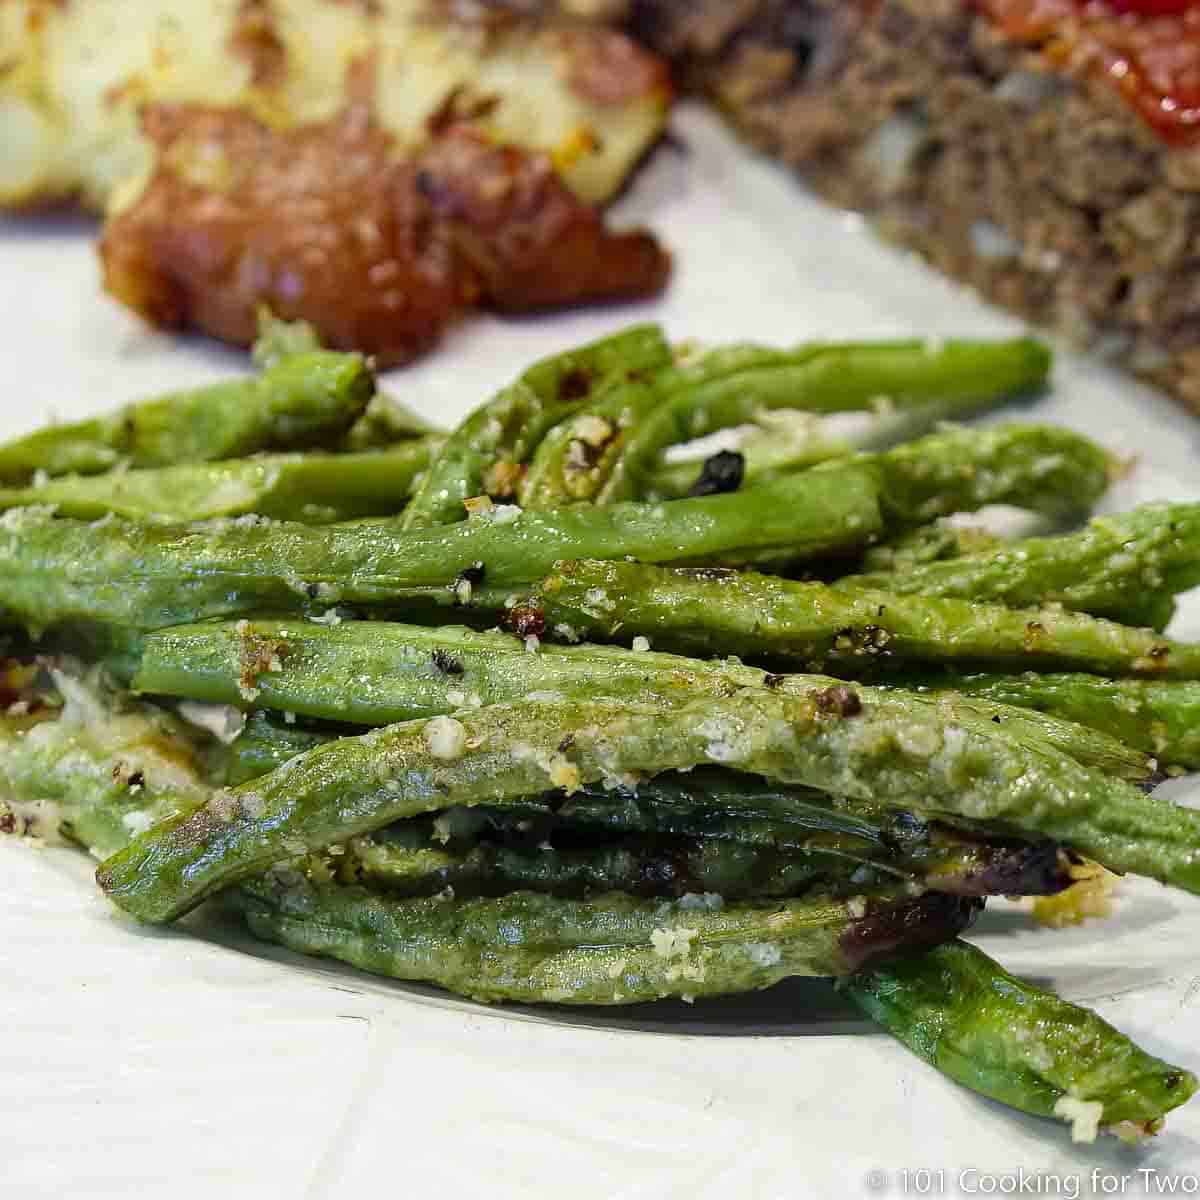 Roasted Parmesan Green Beans 101 Cooking For Two,Etiquette Rules For Zoom Meetings